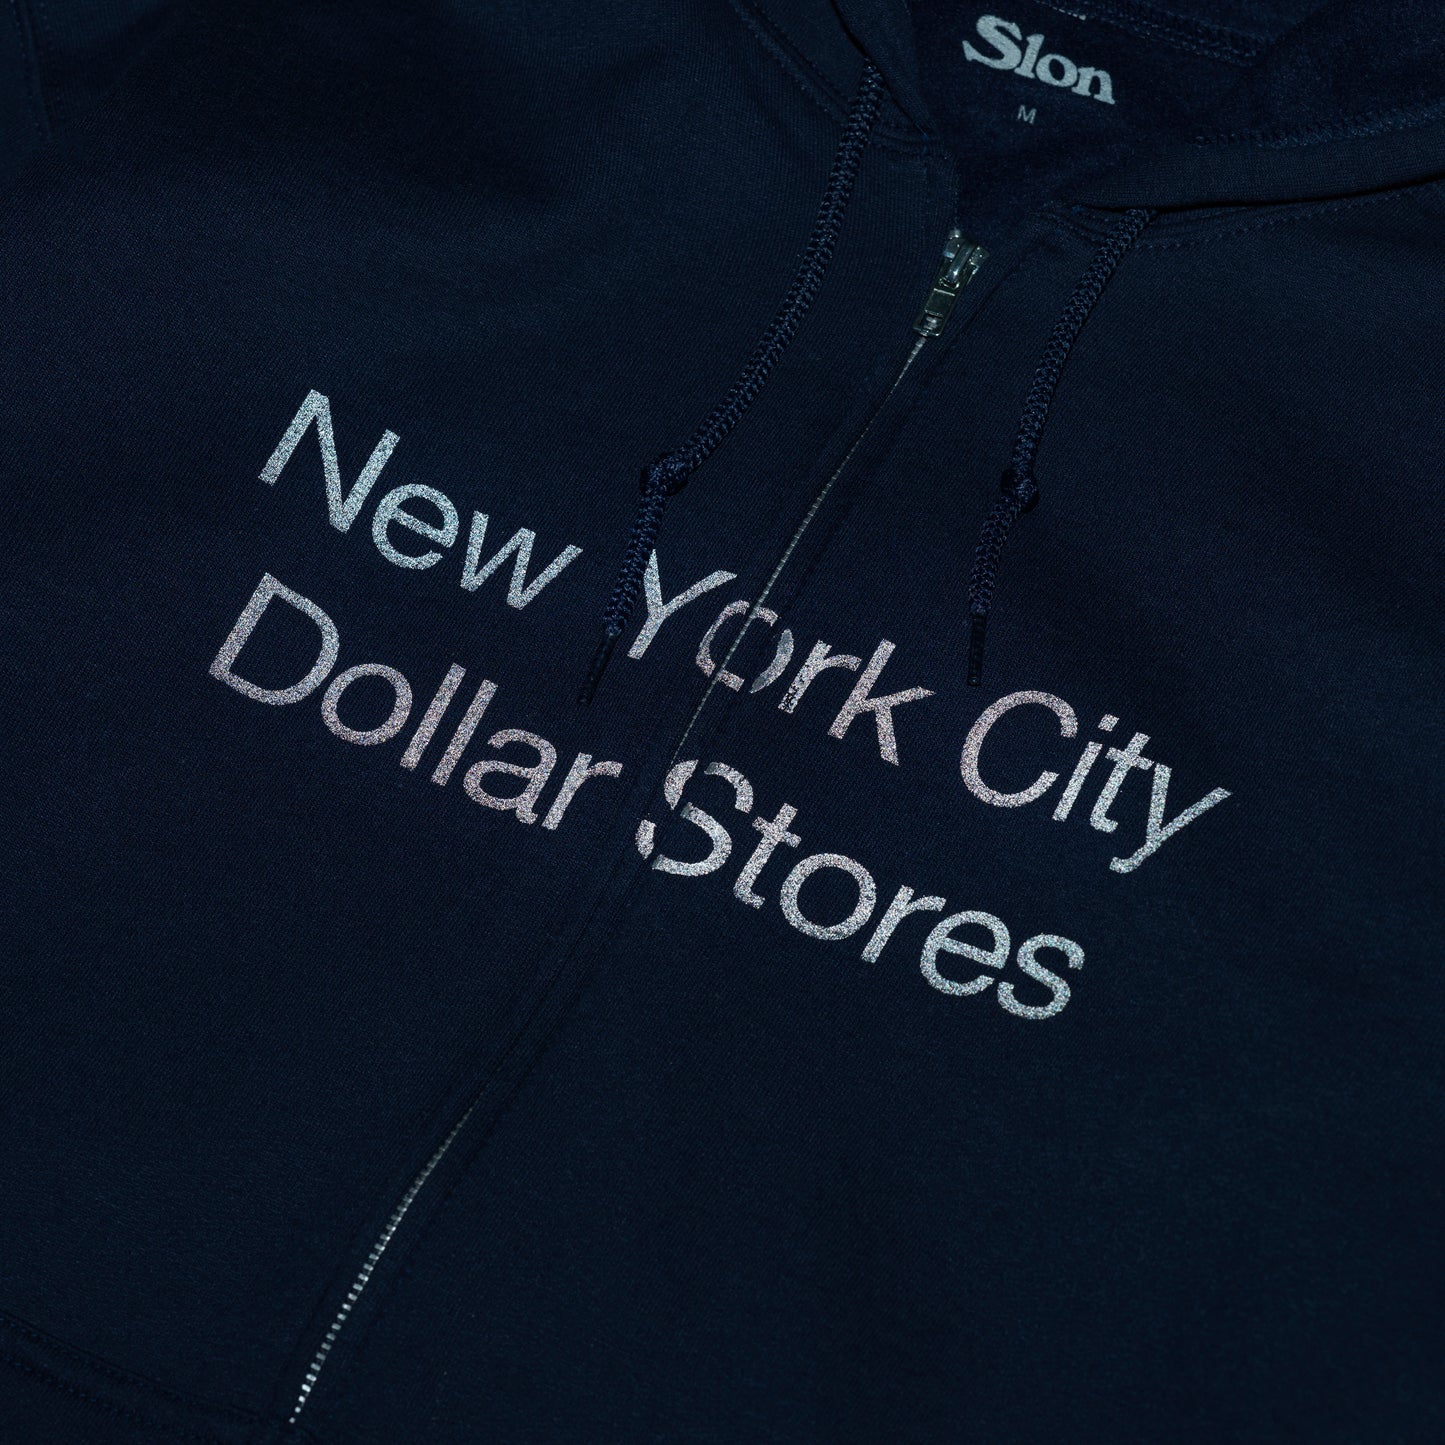 Slon NYC Dollar Stores Zip Hooded "Navy"